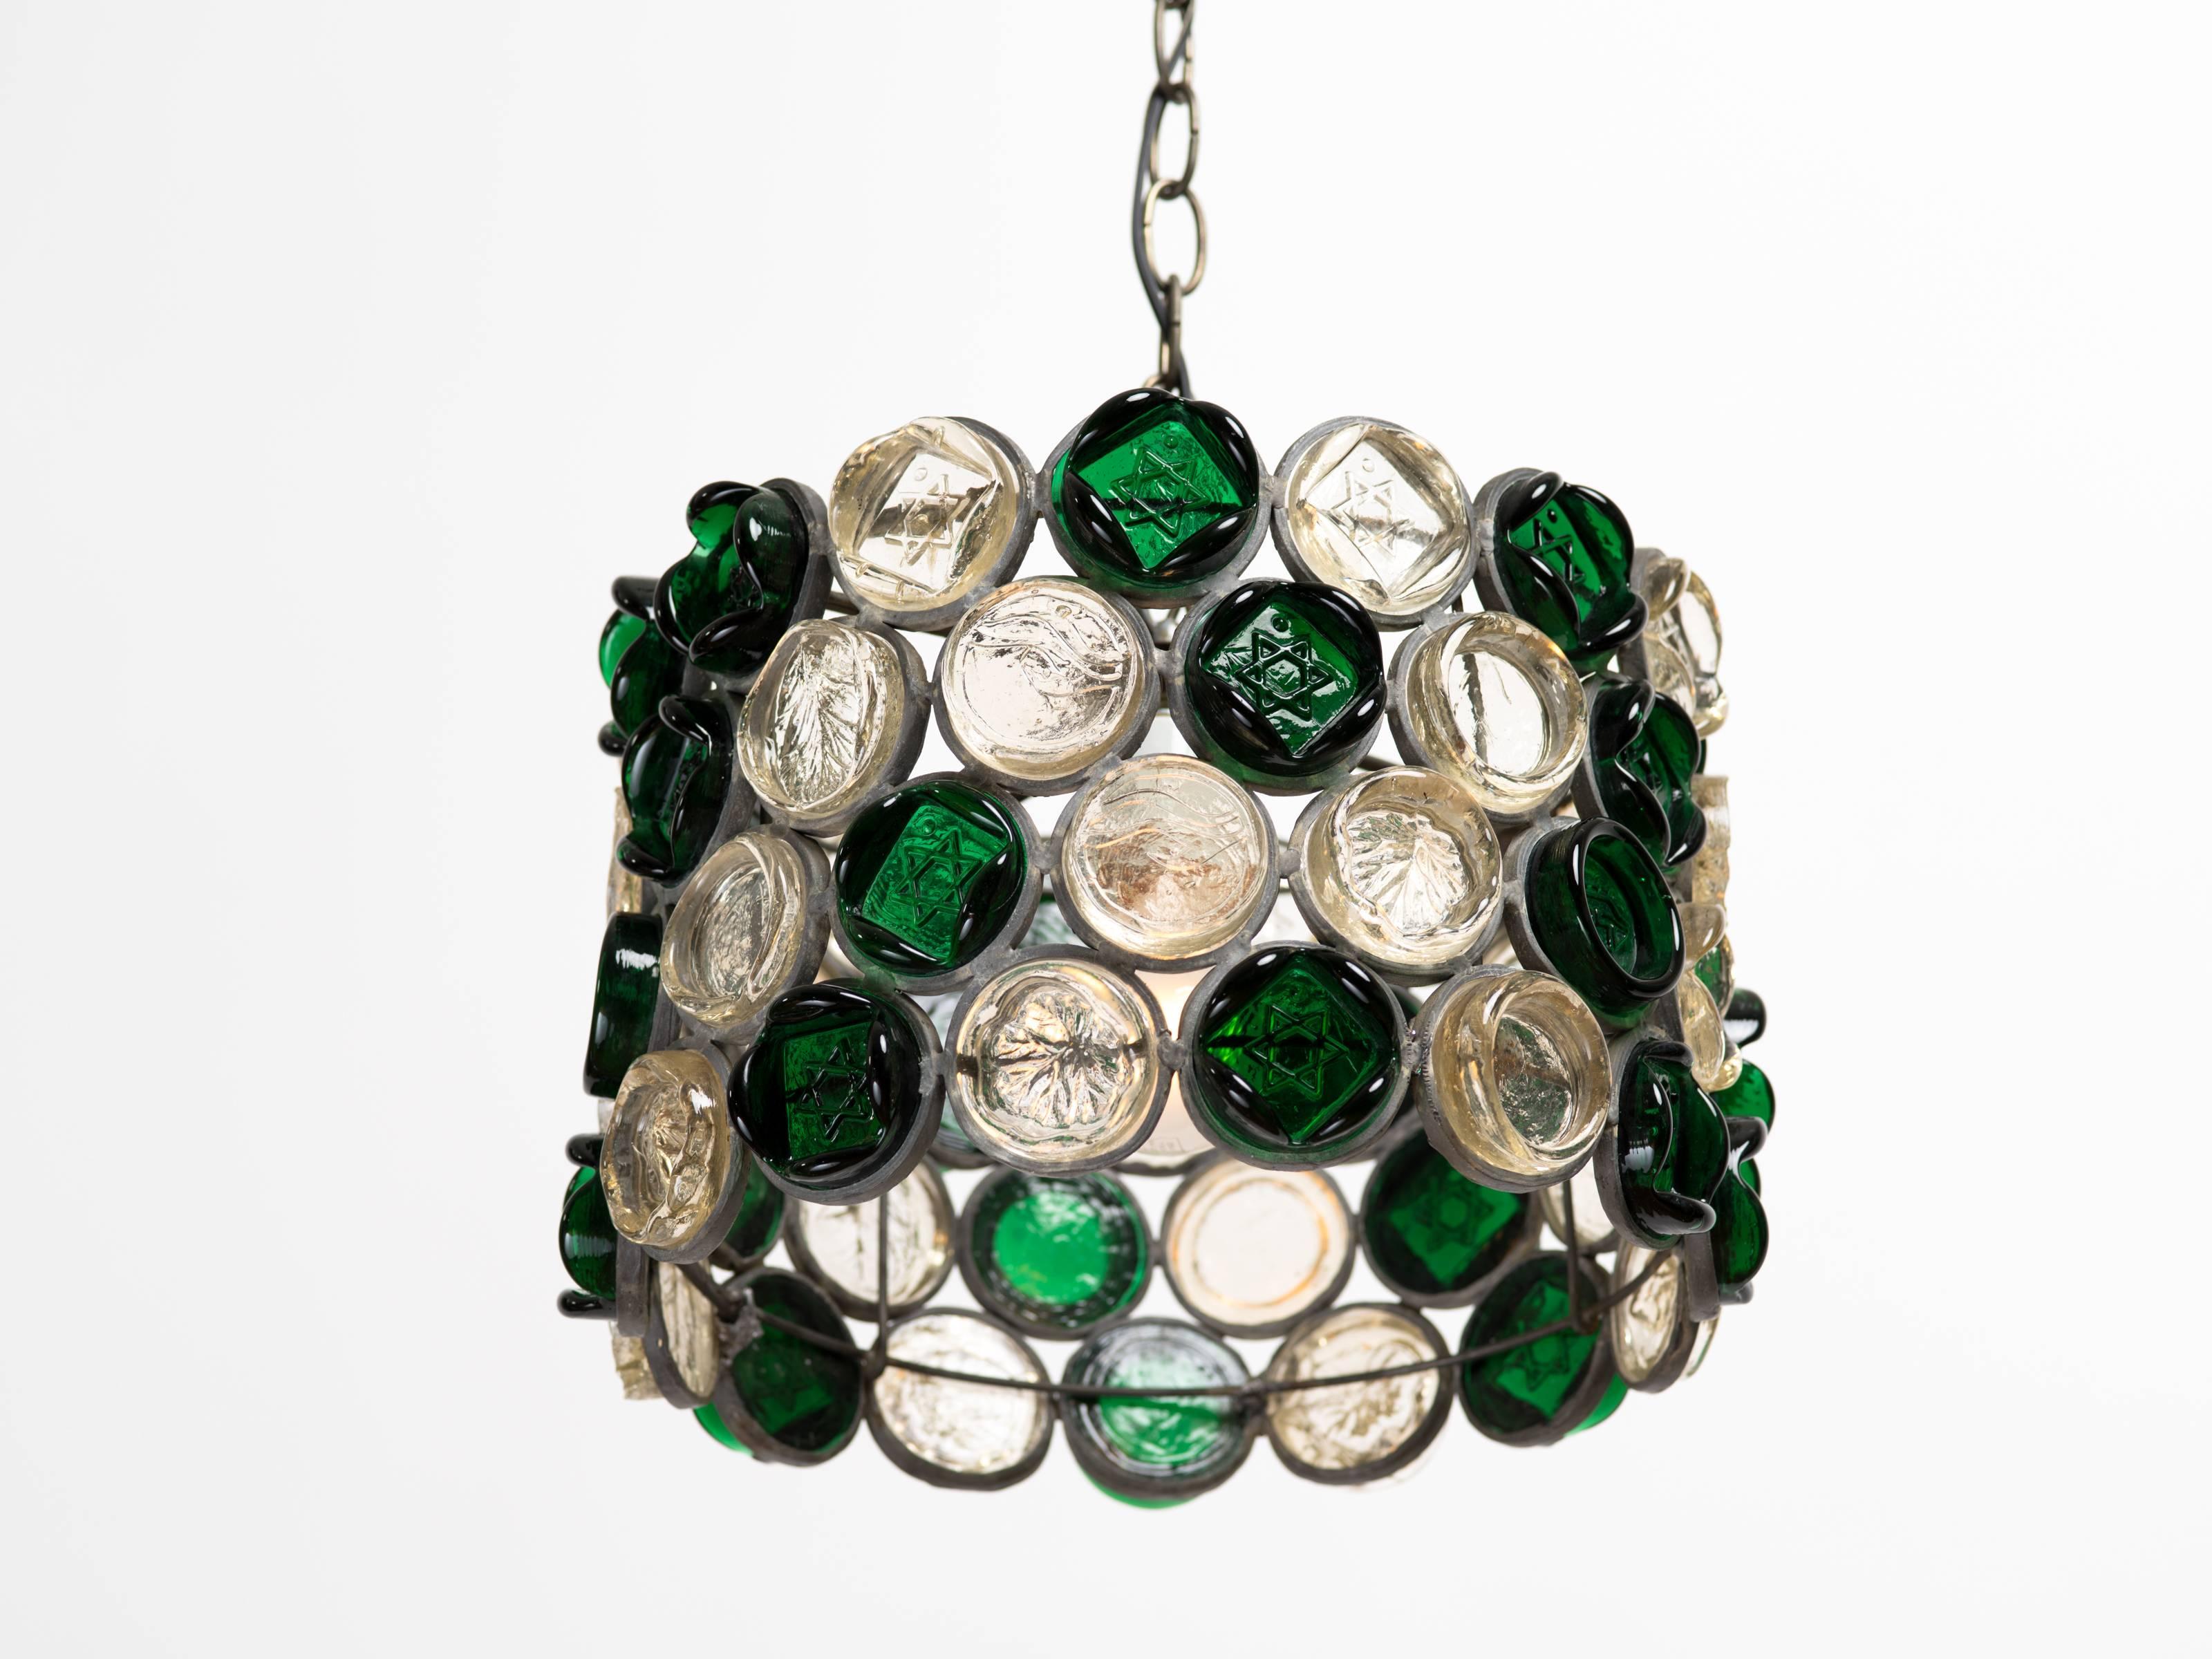 Studio crafted glass disc drum chandelier with alternating leaf and Star of David motifs. Hand wrought metal chandelier body measures 13.75 inches diameter x 9 inches height, with chain, 36.5 inches overall. Height adjustable by adding or removing